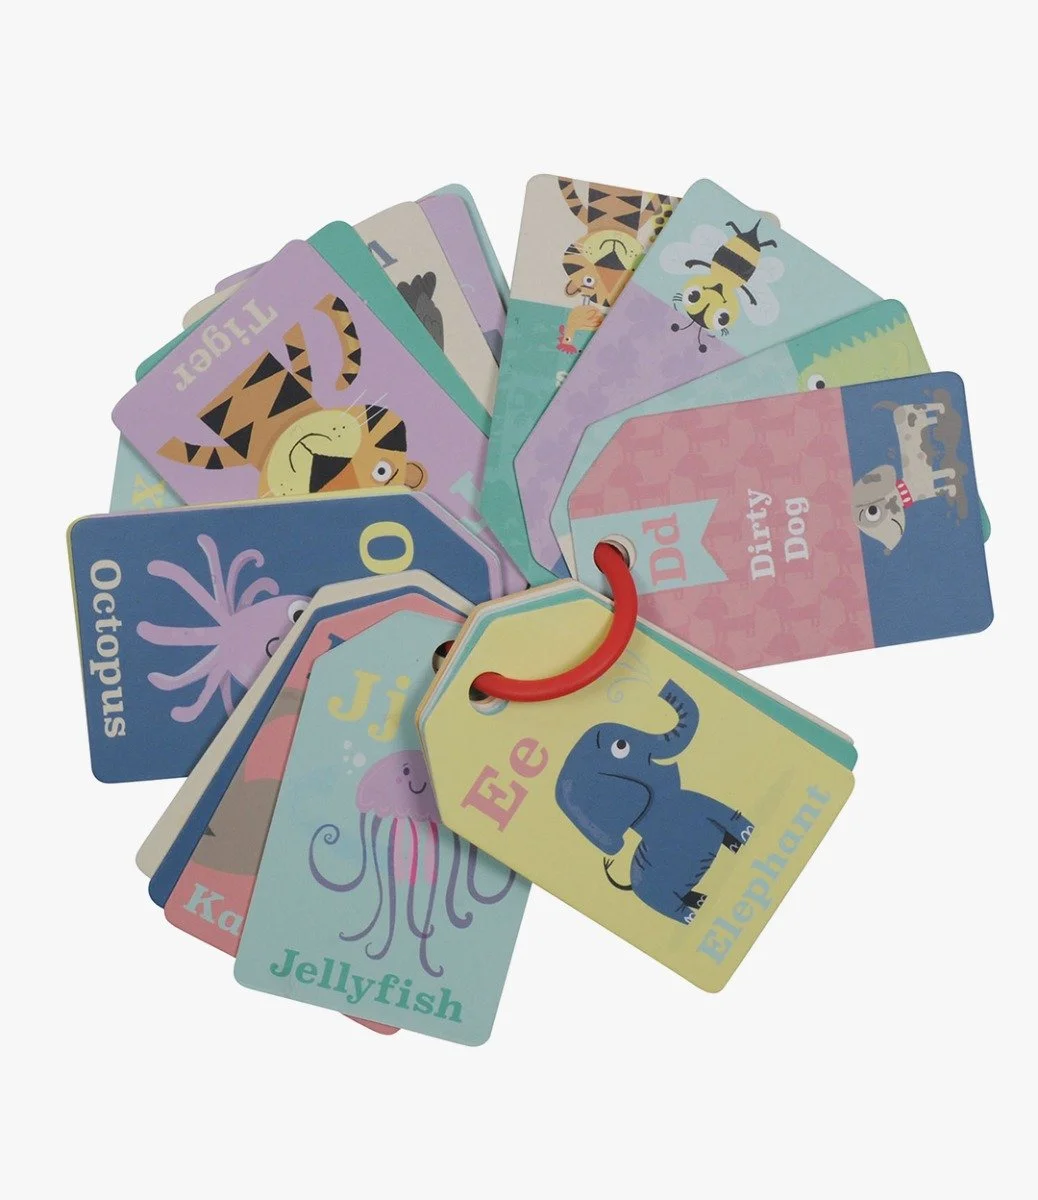 Flash Card - Animal ABC By Tiger Tribe